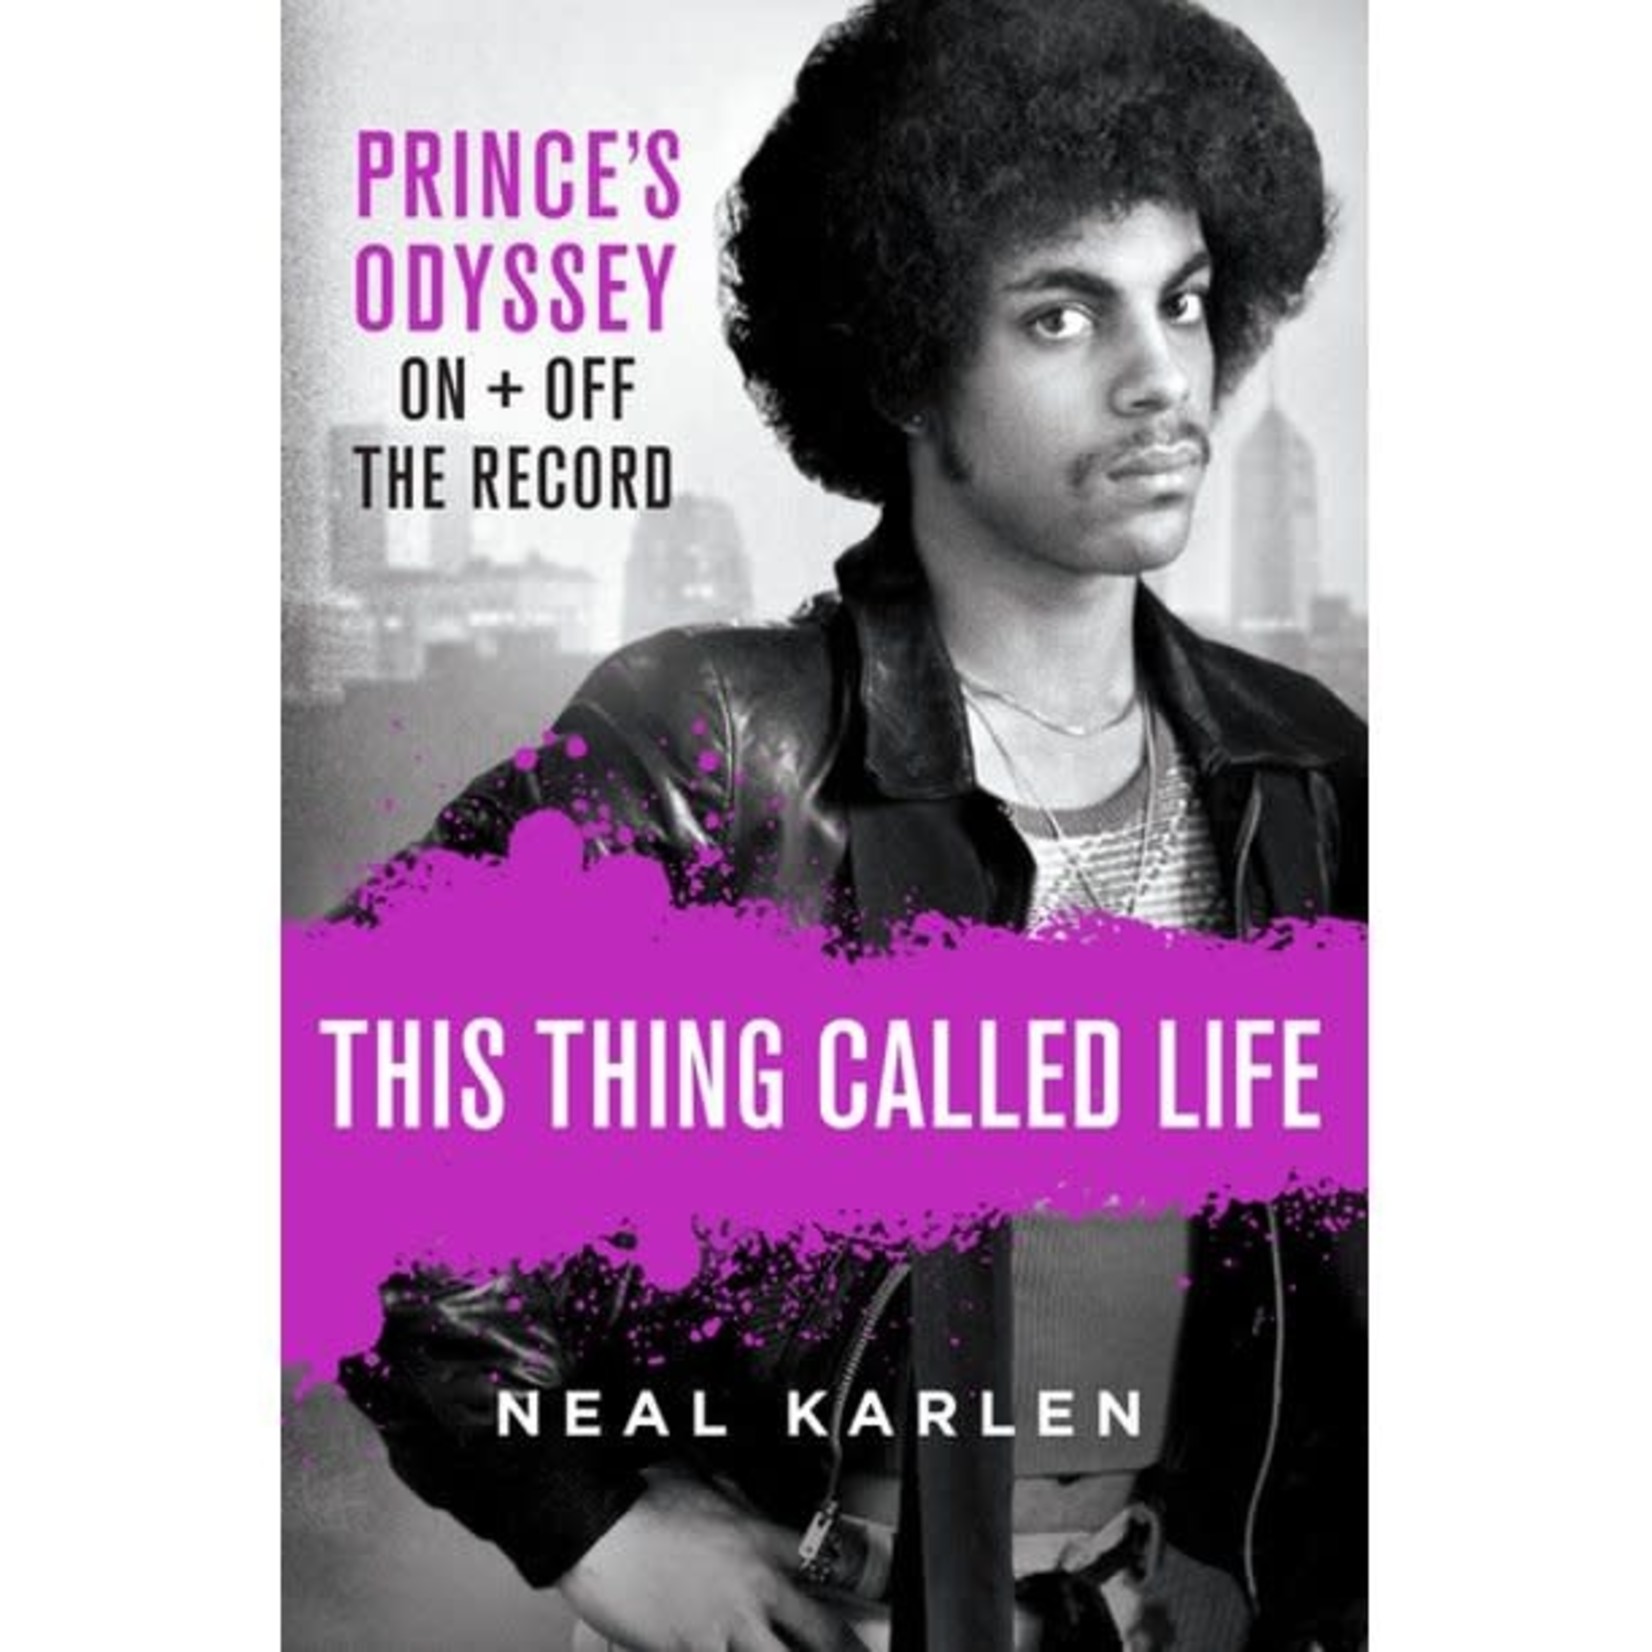 Prince - This Thing Called Life: Prince's Odyssey On + Off The Record [Book]